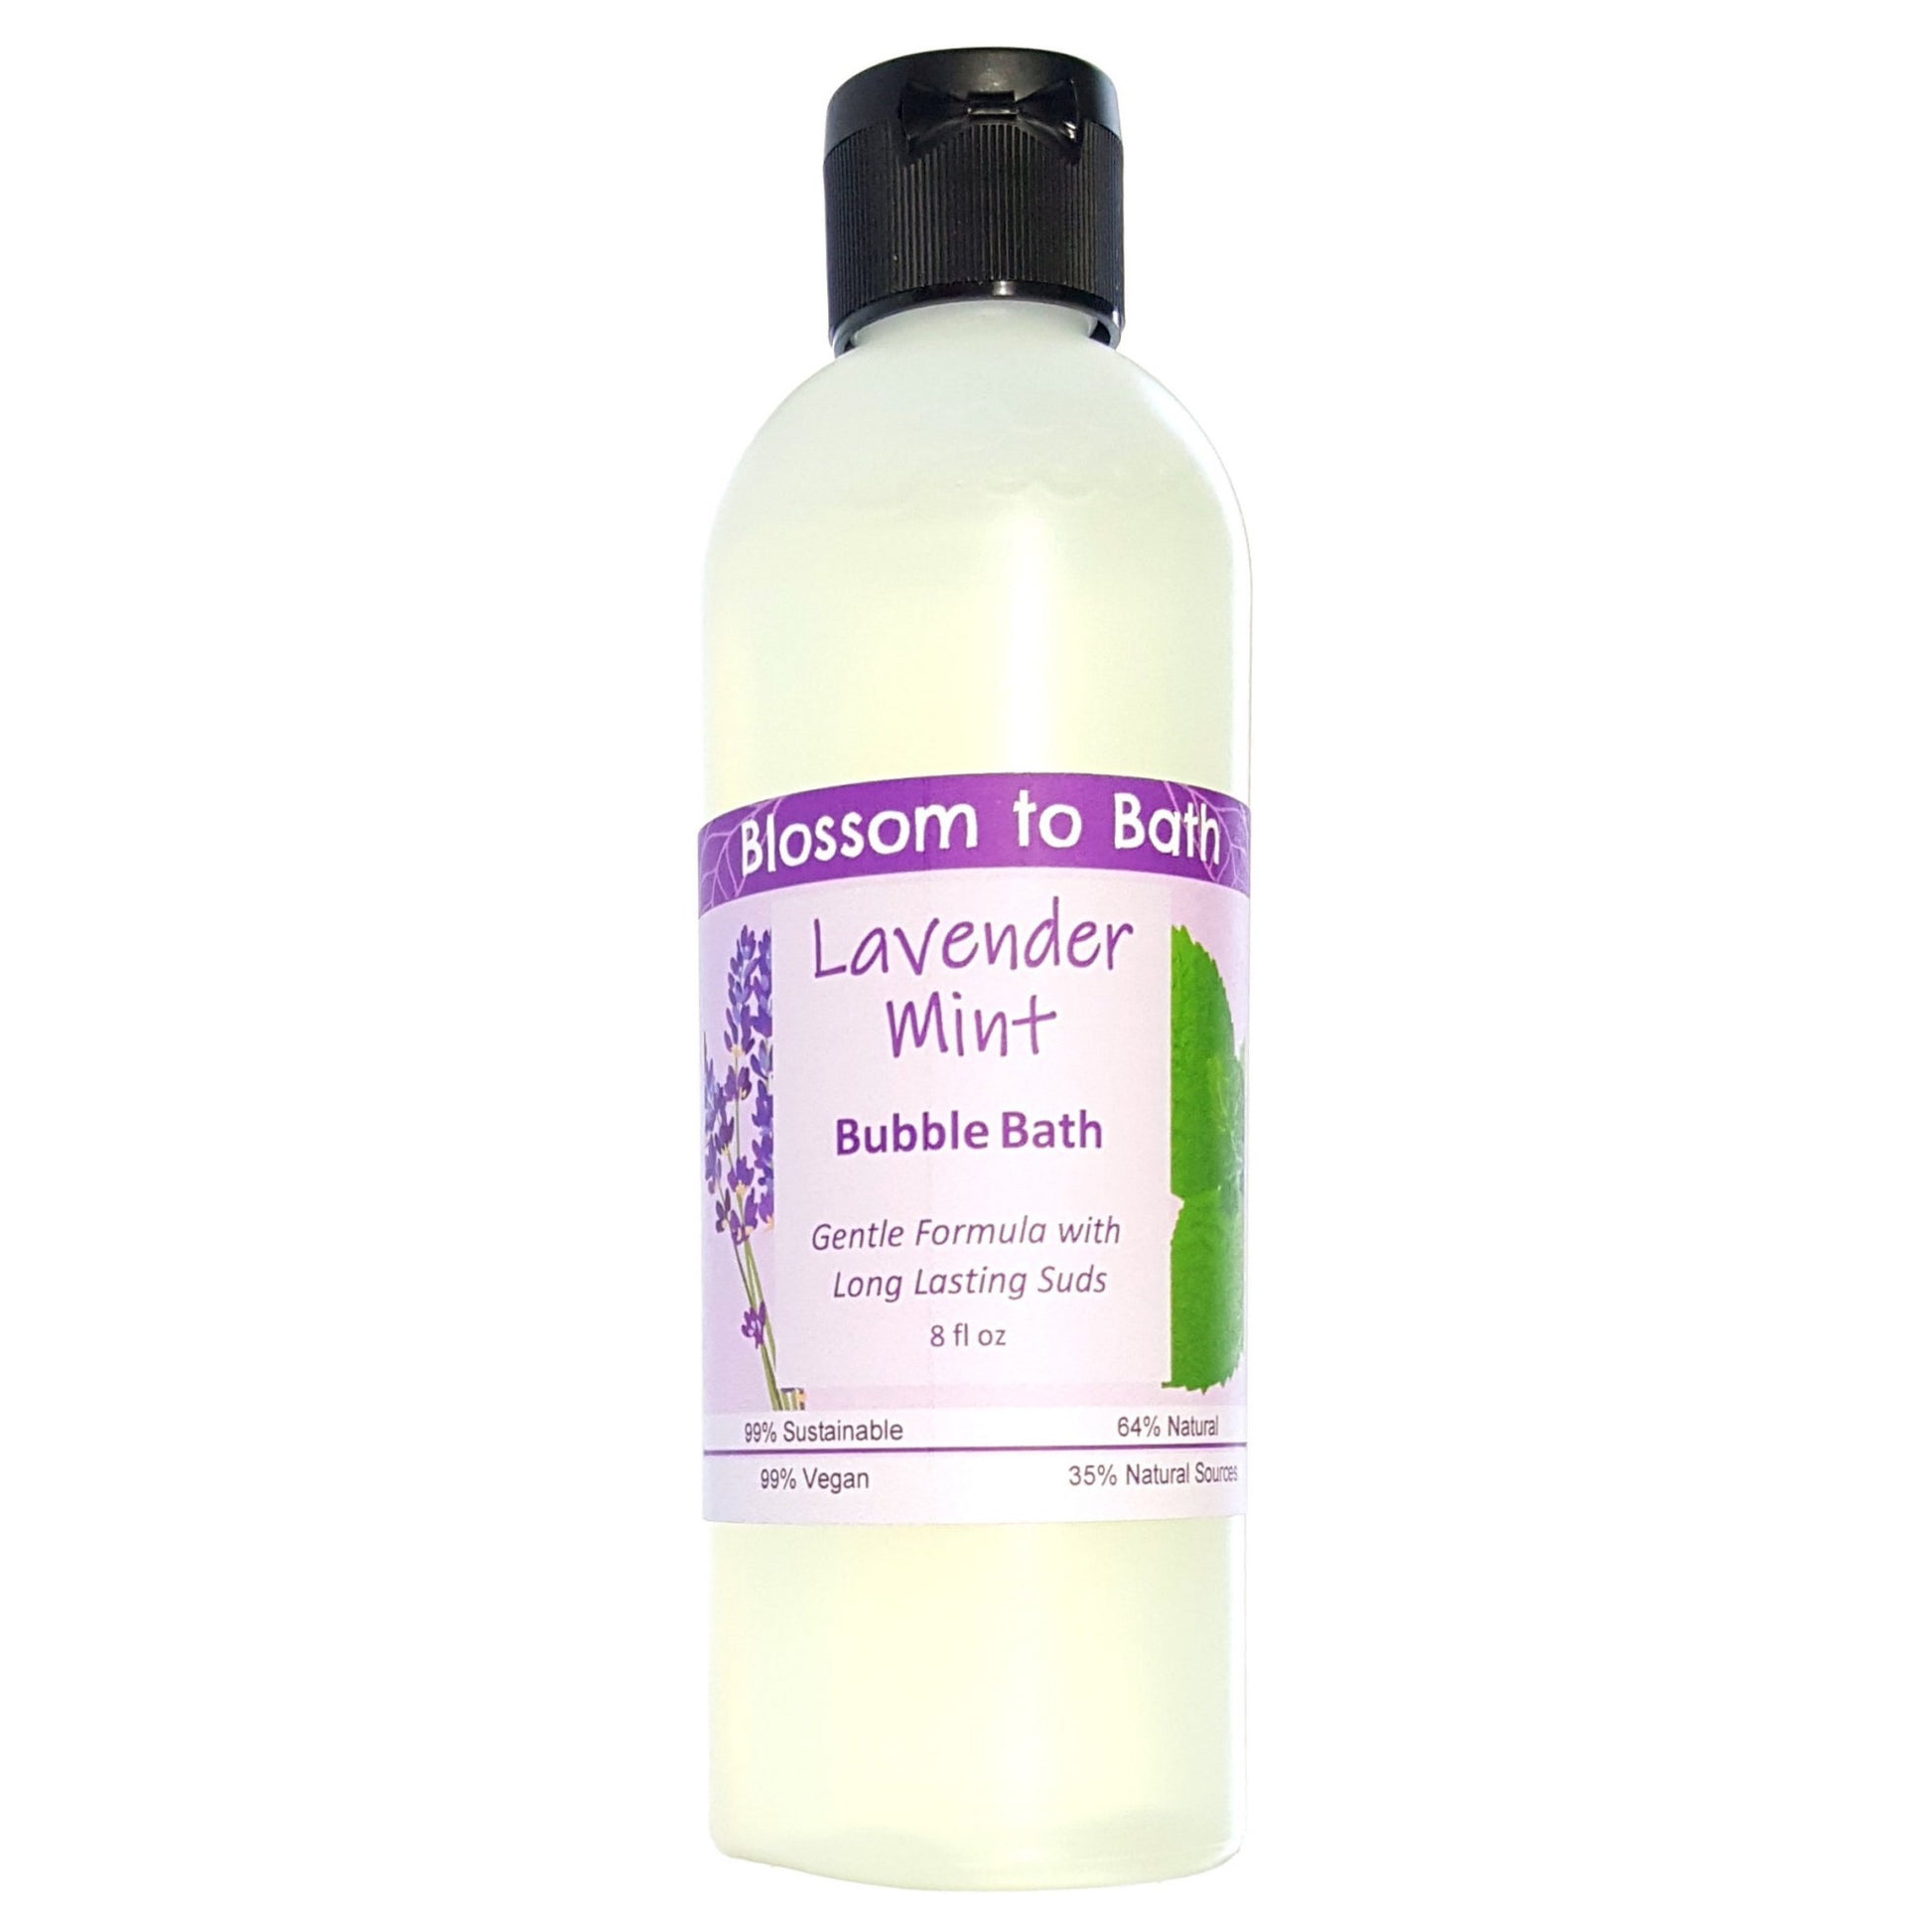 Buy Blossom to Bath Lavender Mint Bubble Bath from Flowersong Soap Studio.  Lively, long lasting luxury bubbles in a gentle plant based formula for maximum relaxation time  A cheerfully relaxing combination of lavender and peppermint.